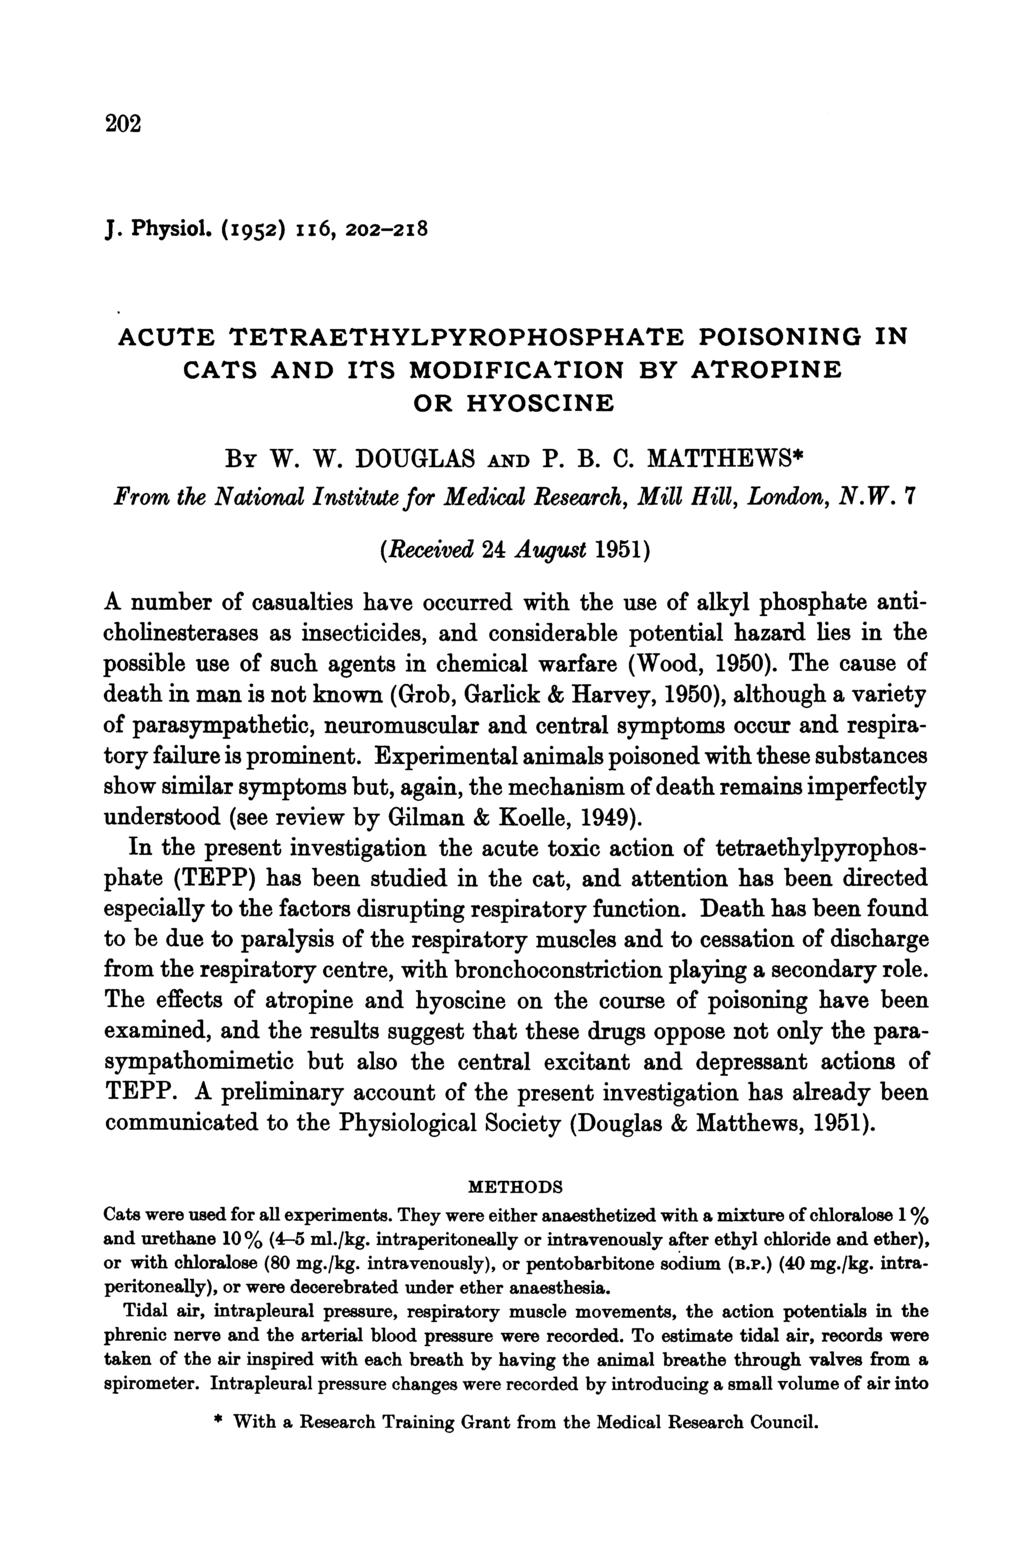 202 J. Physiol. (I952) ii6, 202-2I8 ACUTE TETRAETHYLPYROPHOSPHATE POISONING IN CATS AND ITS MODIFICATION BY ATROPINE OR HYOSCINE BY W. W. DOUGLAS AND P. B. C. MATTHEWS* From the Nationwal Institute for Medical Research, Mill Hill, London, N.